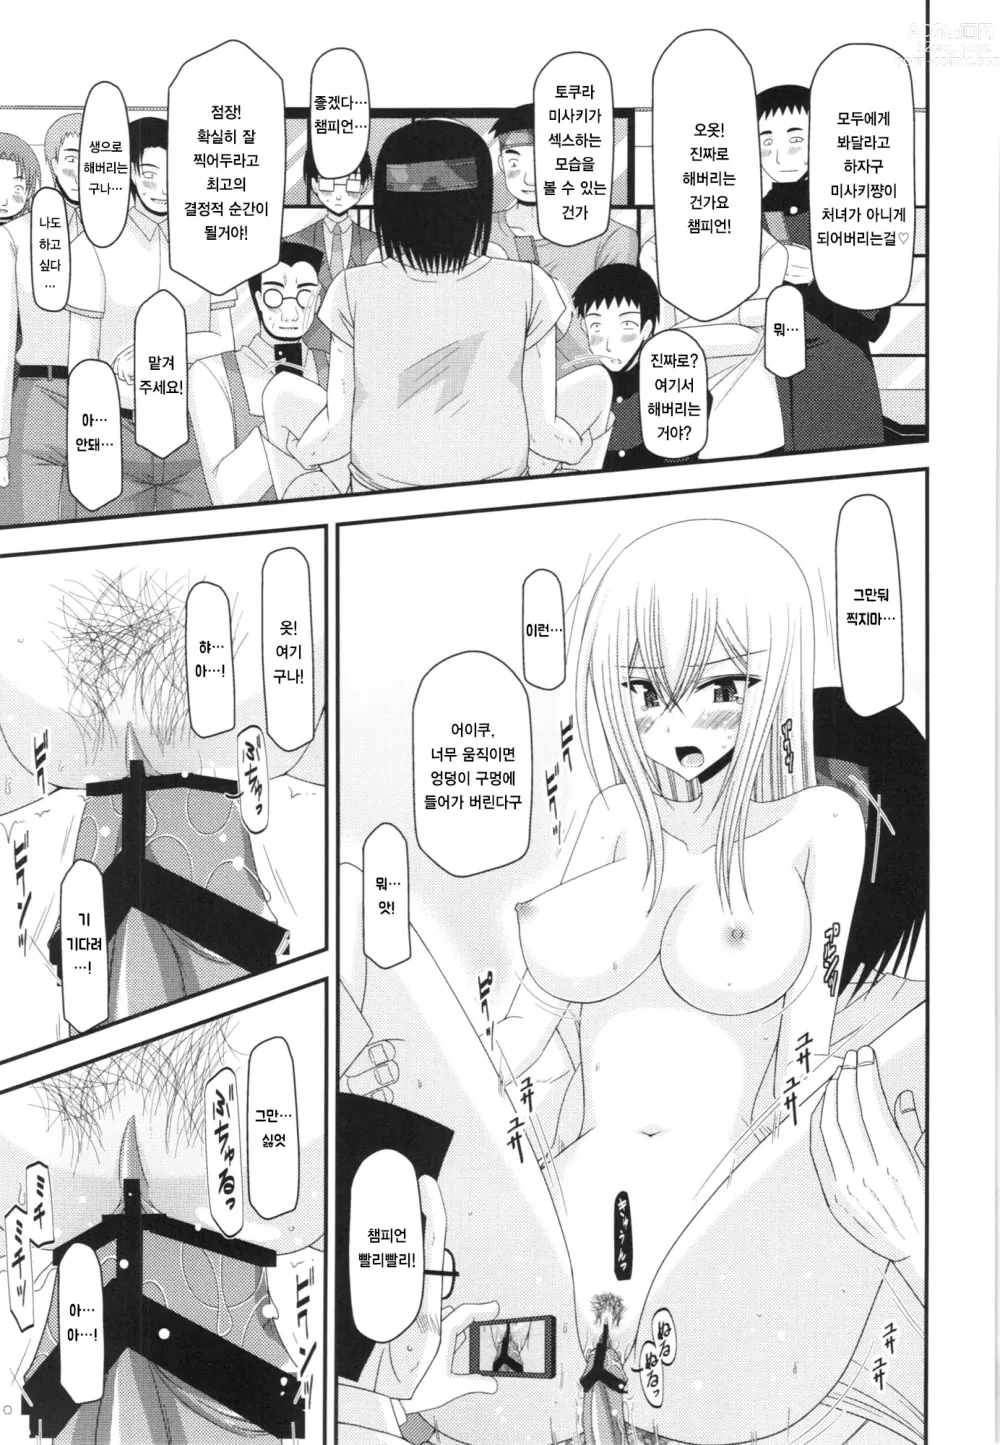 Page 45 of doujinshi Unbreakable Limit